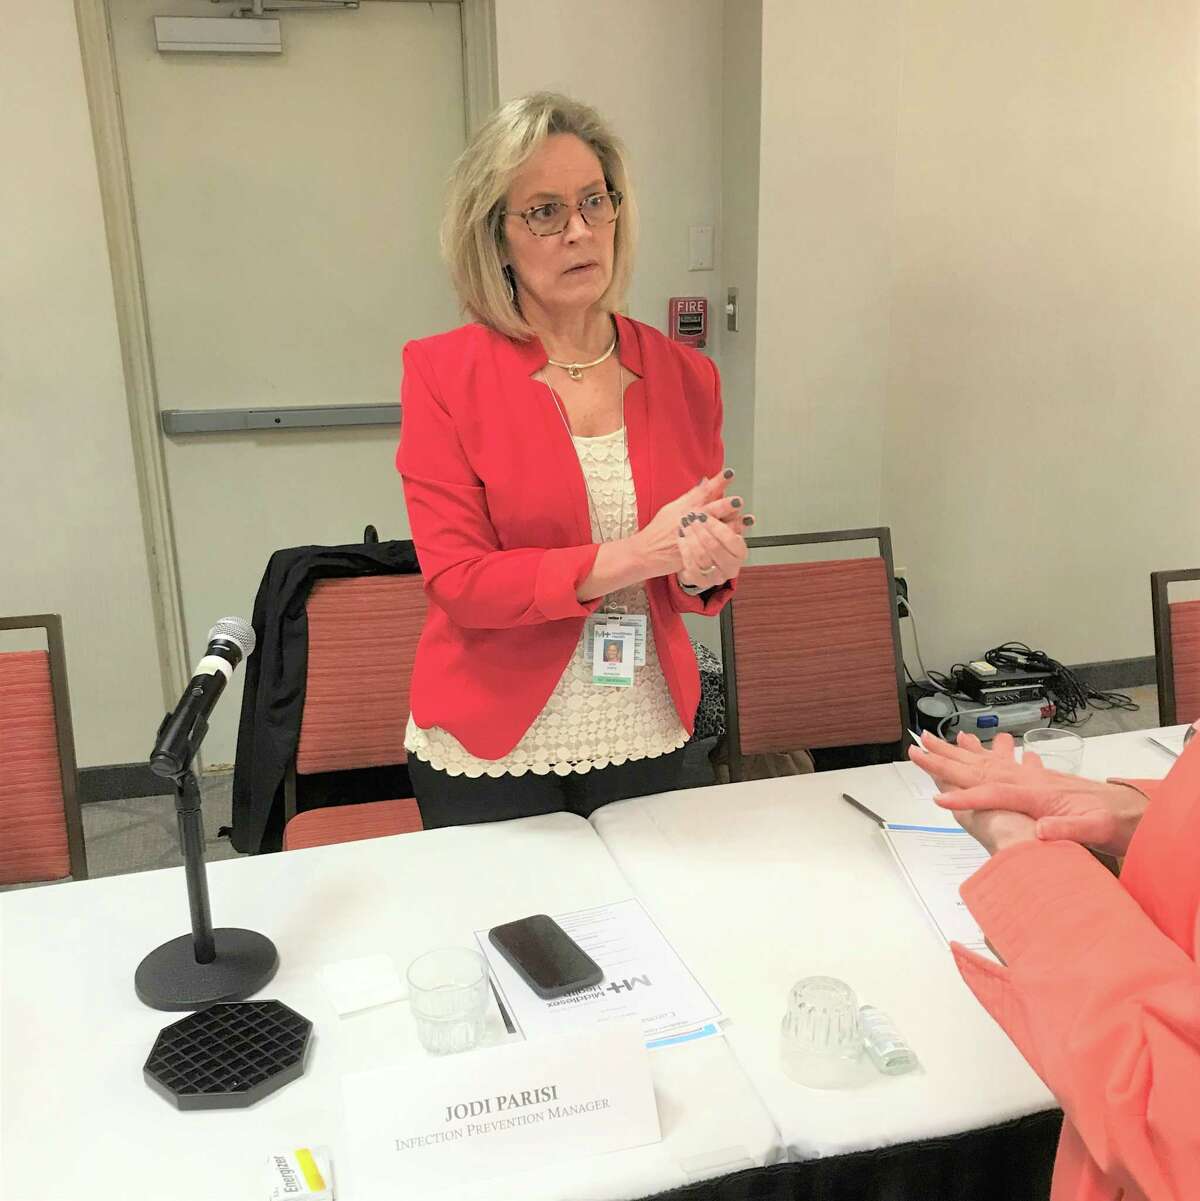 Dr. Jodi Parisi during a panel discussion, “Coronavirus: Understand the Facts, Misinformation and the Public Health Response,” at the Courtyard by Marriott.